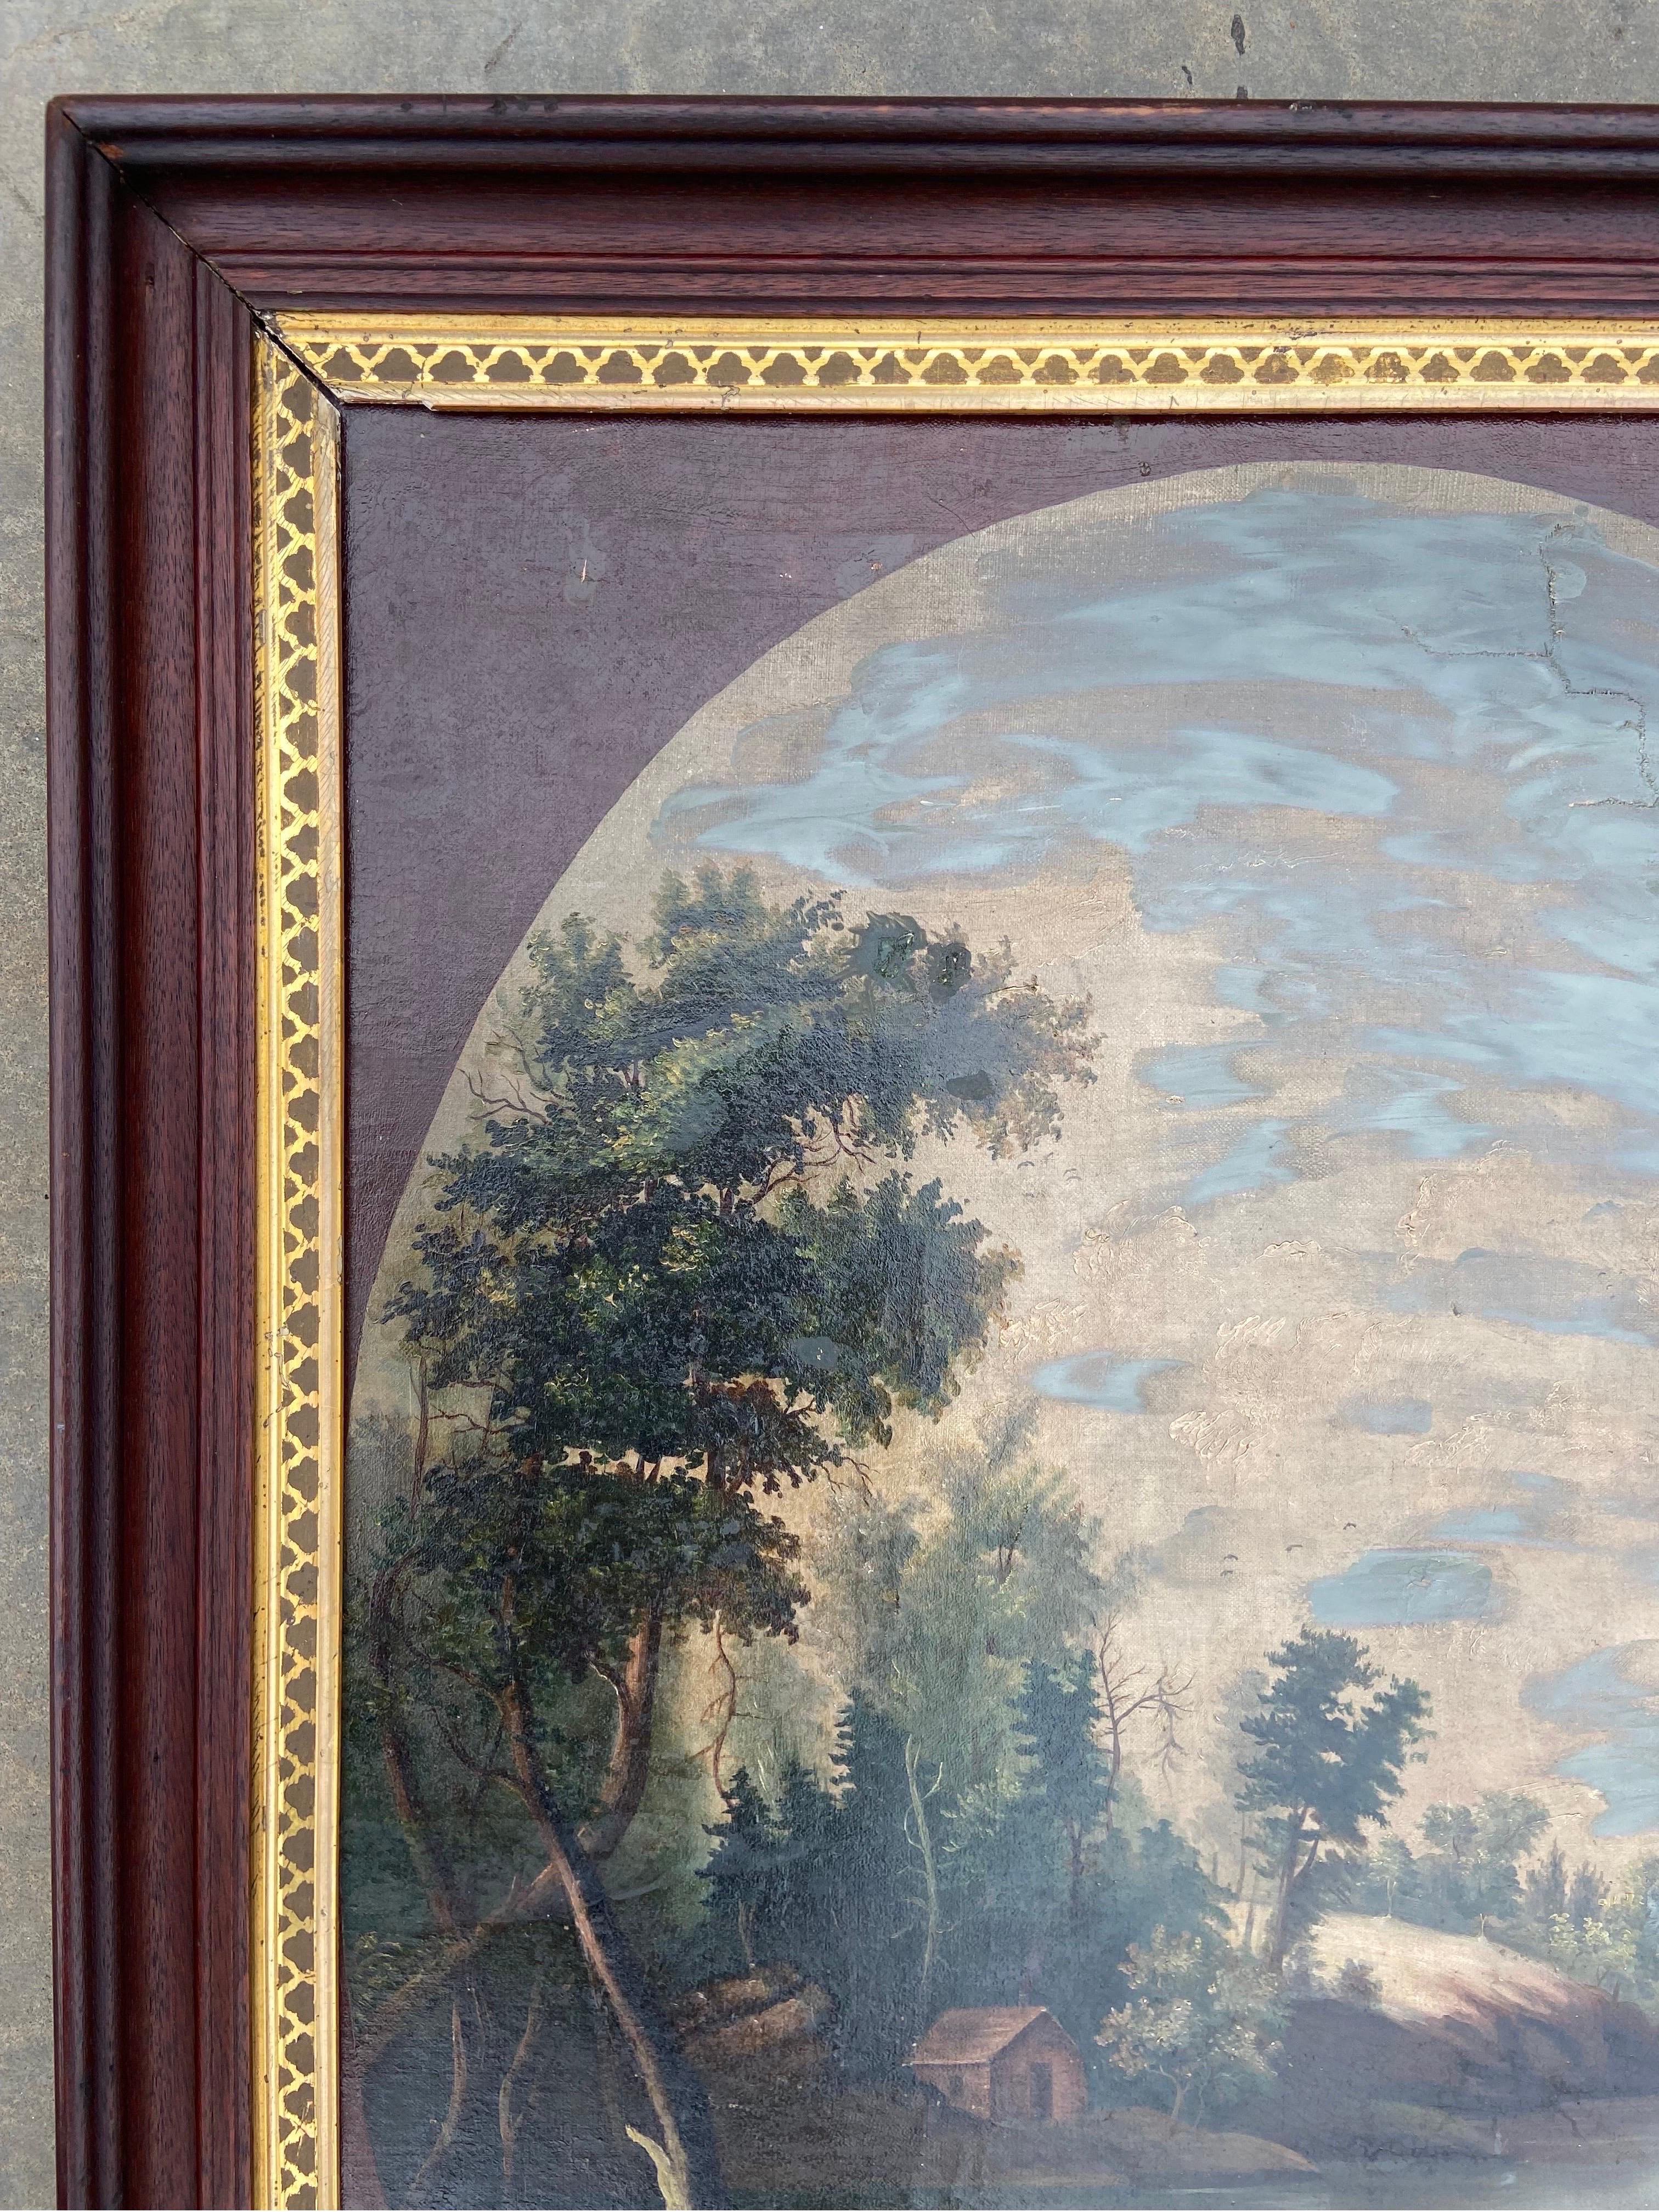 A mid to late 19th Century antique oil on canvas landscape painting done in the style of American artist Albertus del Orient Browere. This painting is done in oval form on a rectangular canvas and stretcher. The portions to be covered by the